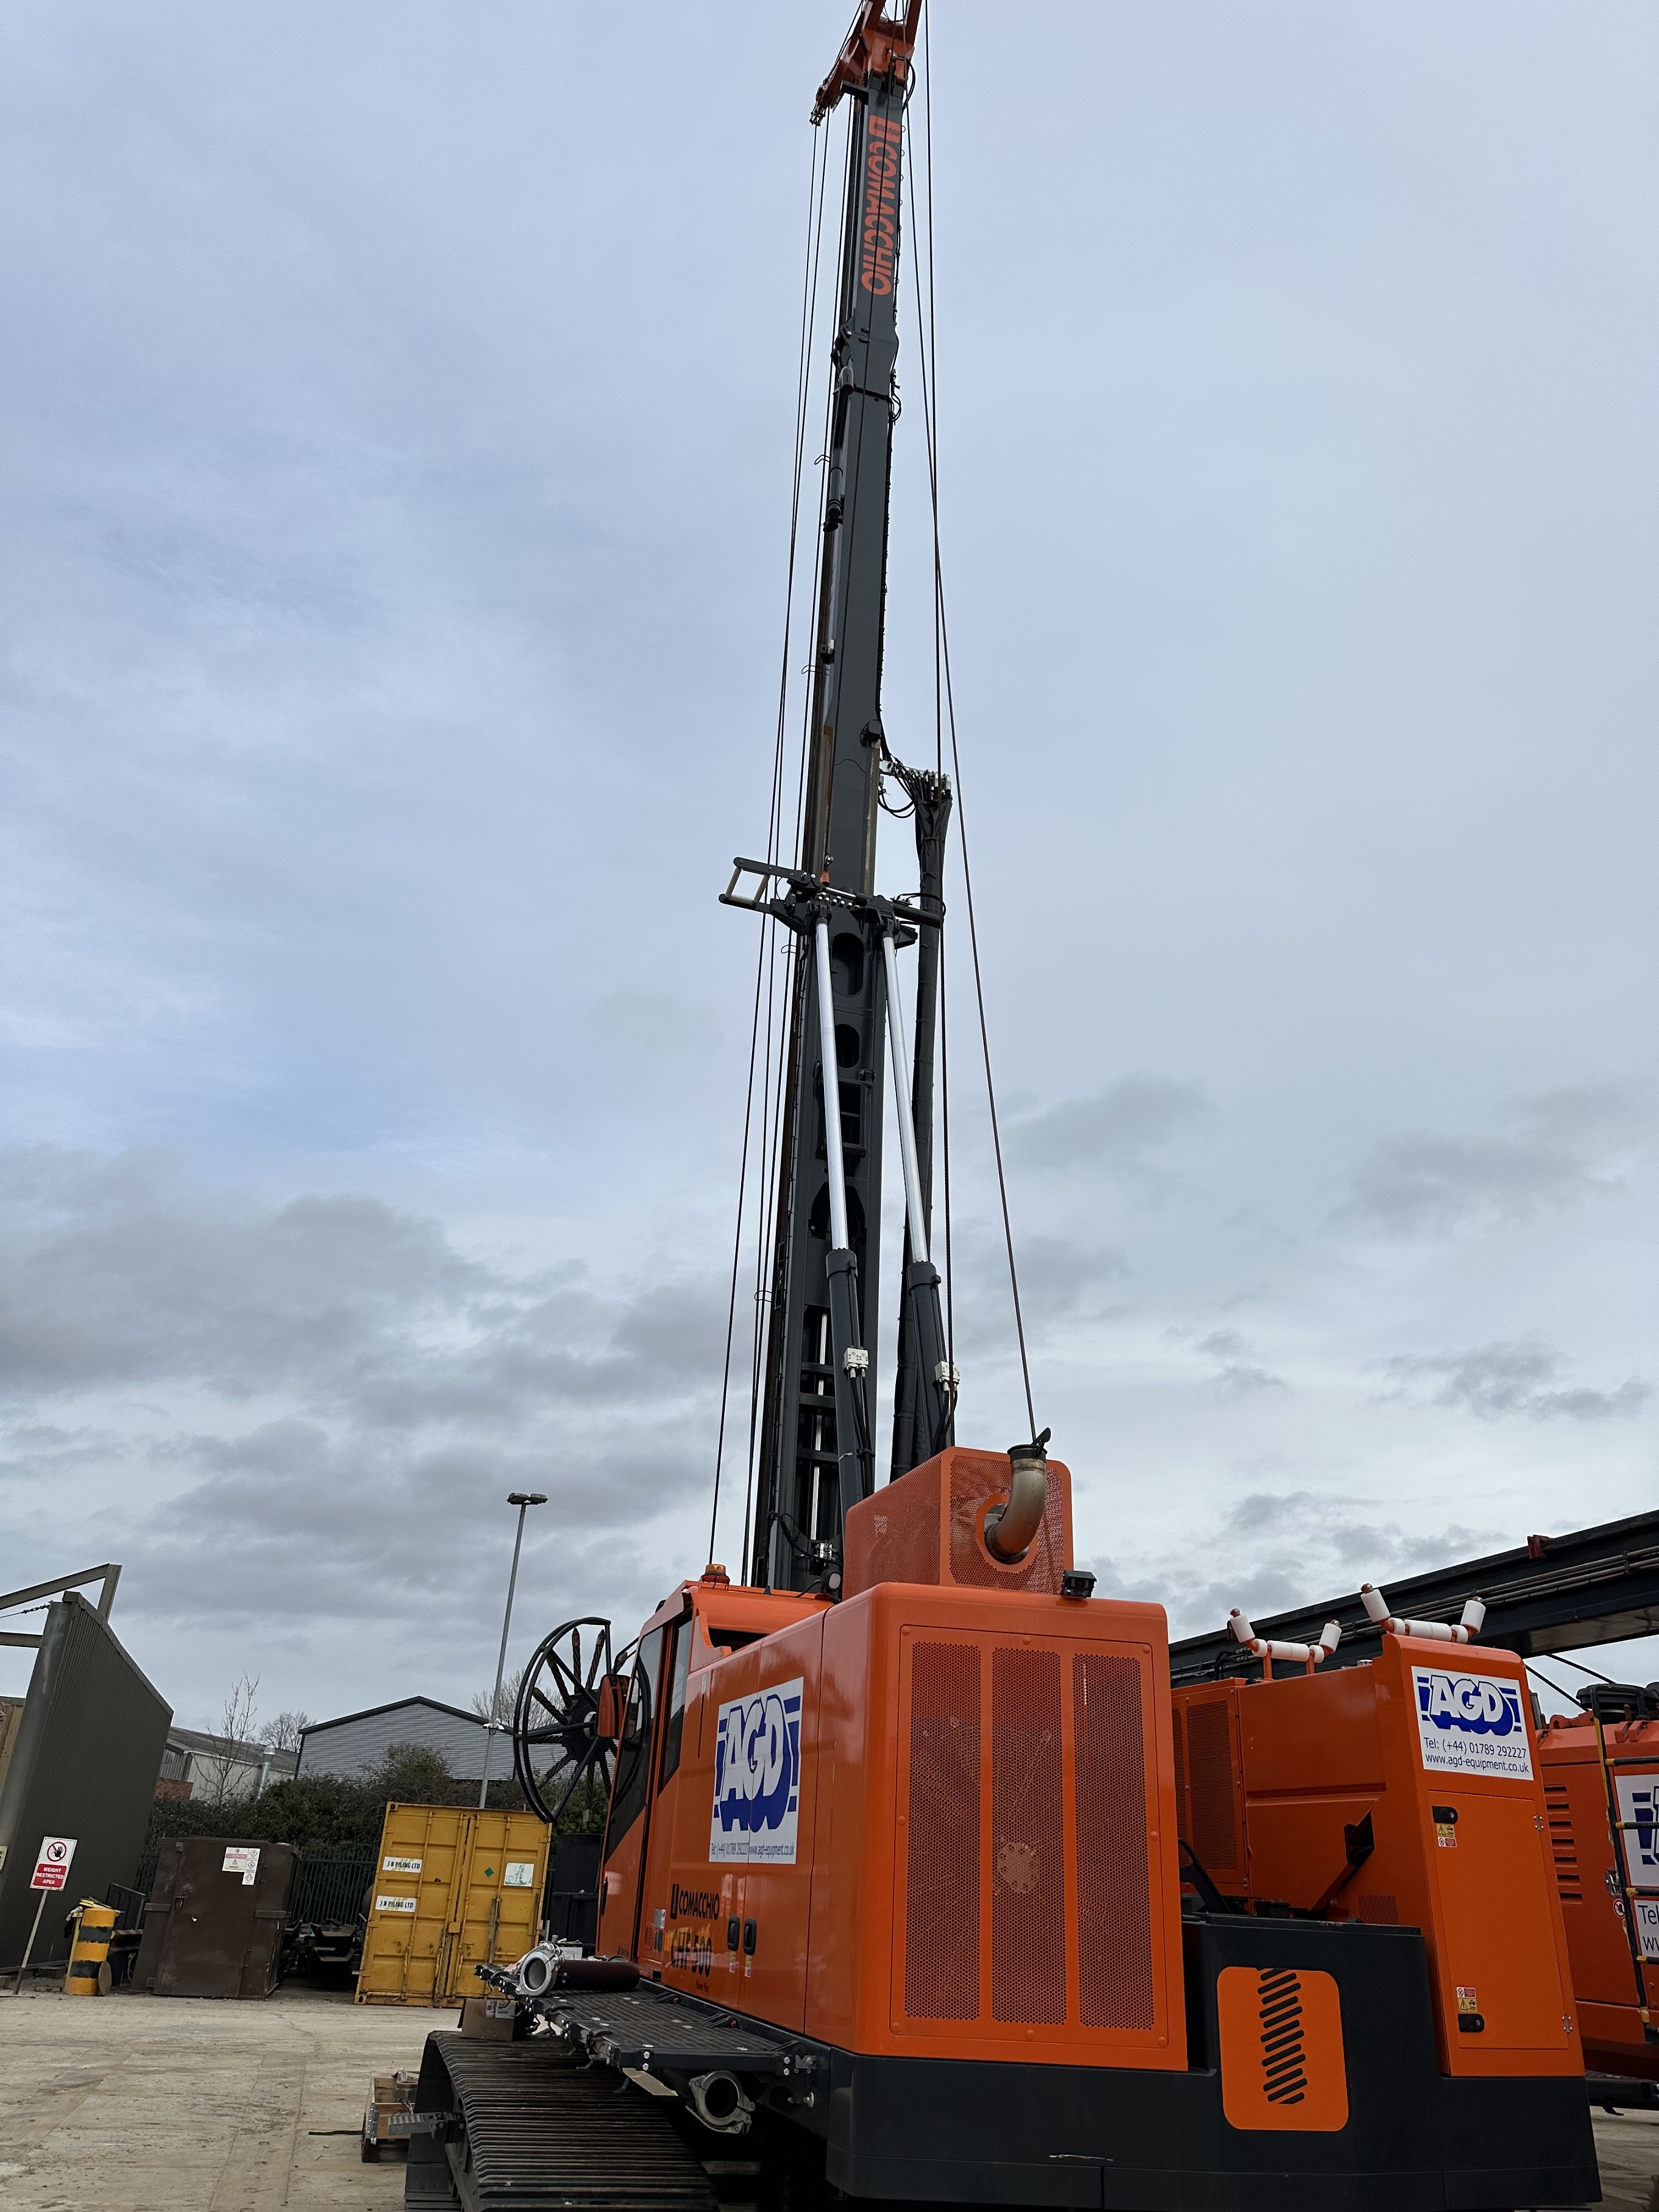 Suppliers of Comacchio CHF500 CFA Piling Rig Hire UK